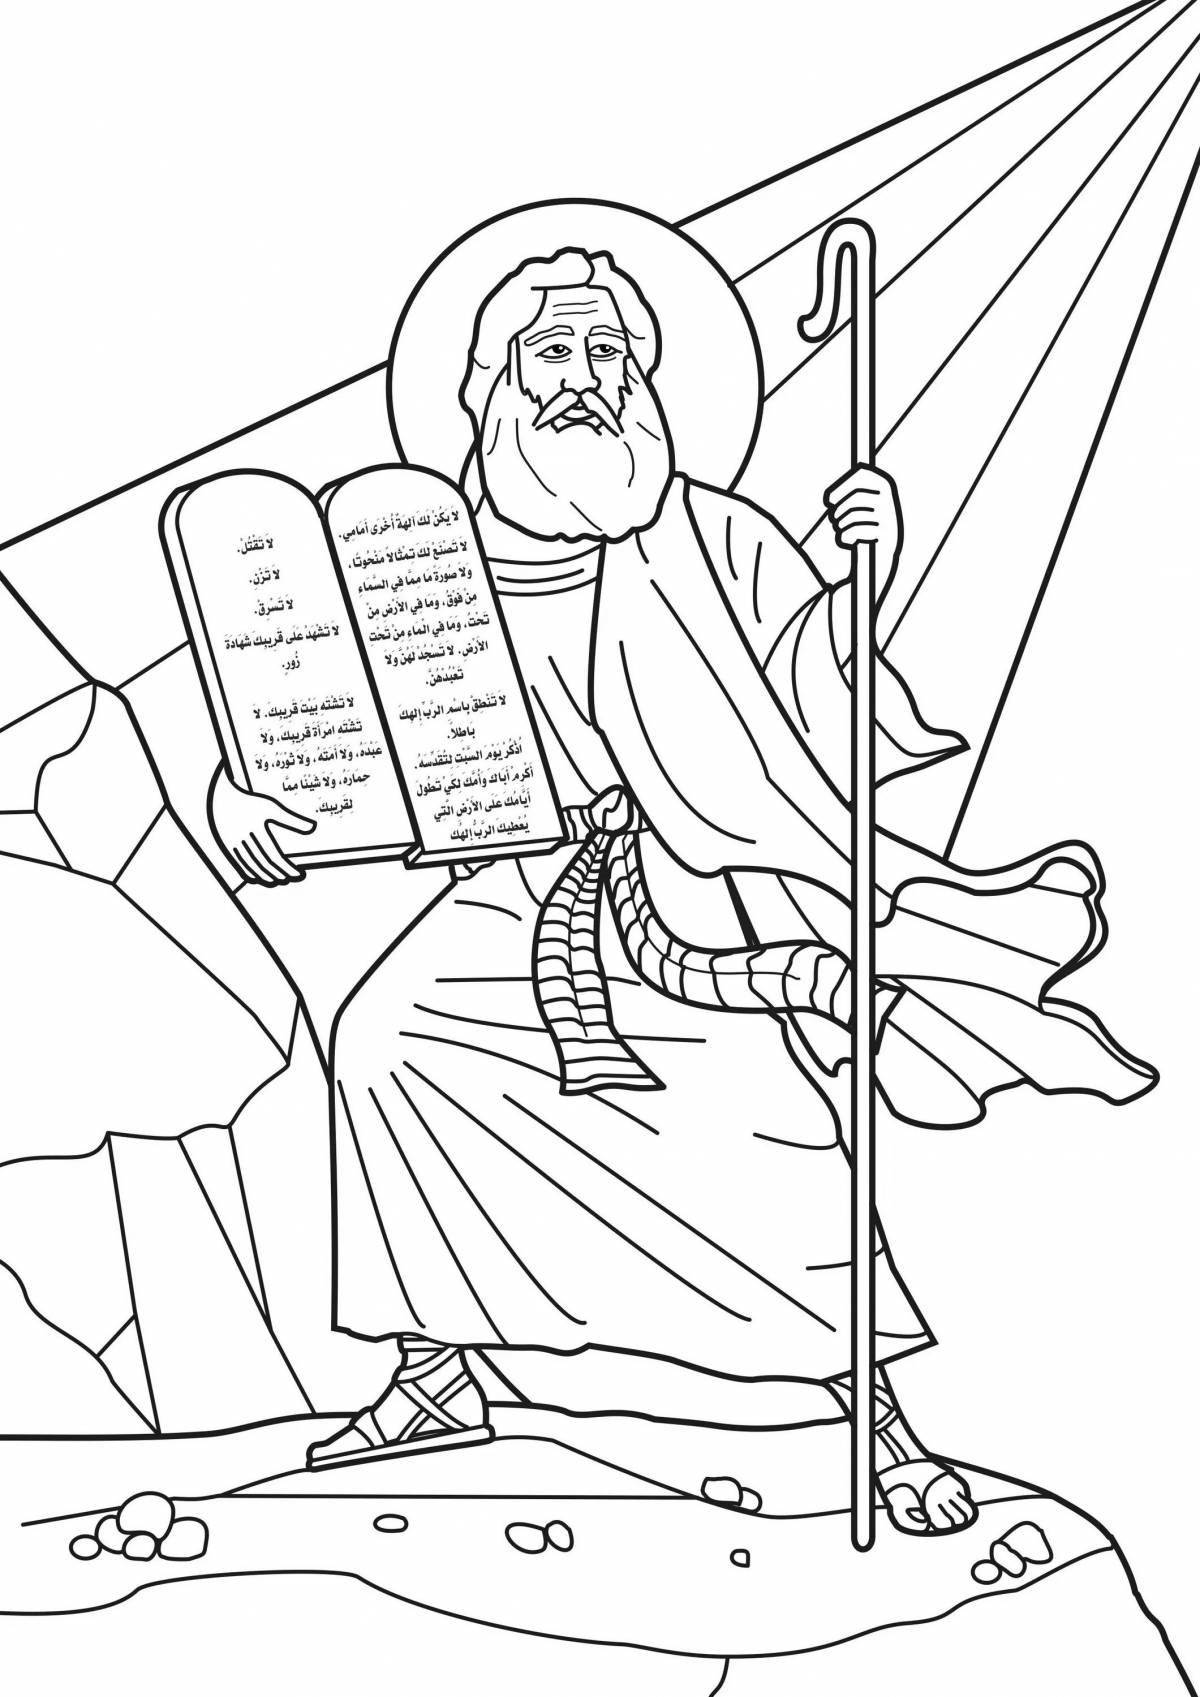 Moses fun coloring for kids